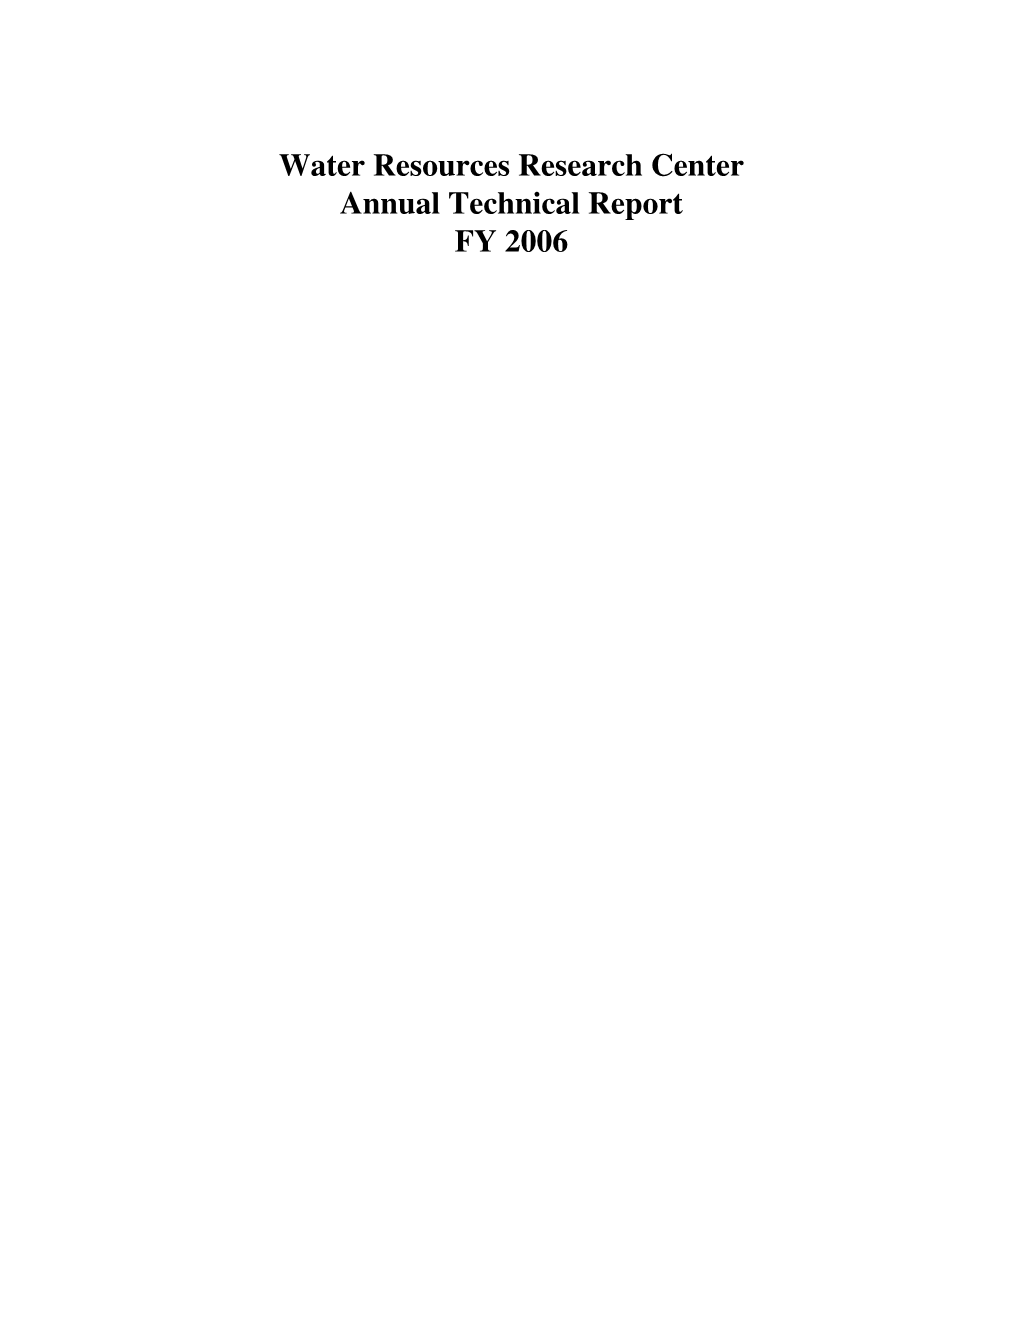 Water Resources Research Center Annual Technical Report FY 2006 Introduction Fiscal Year March 2006 - February 2007